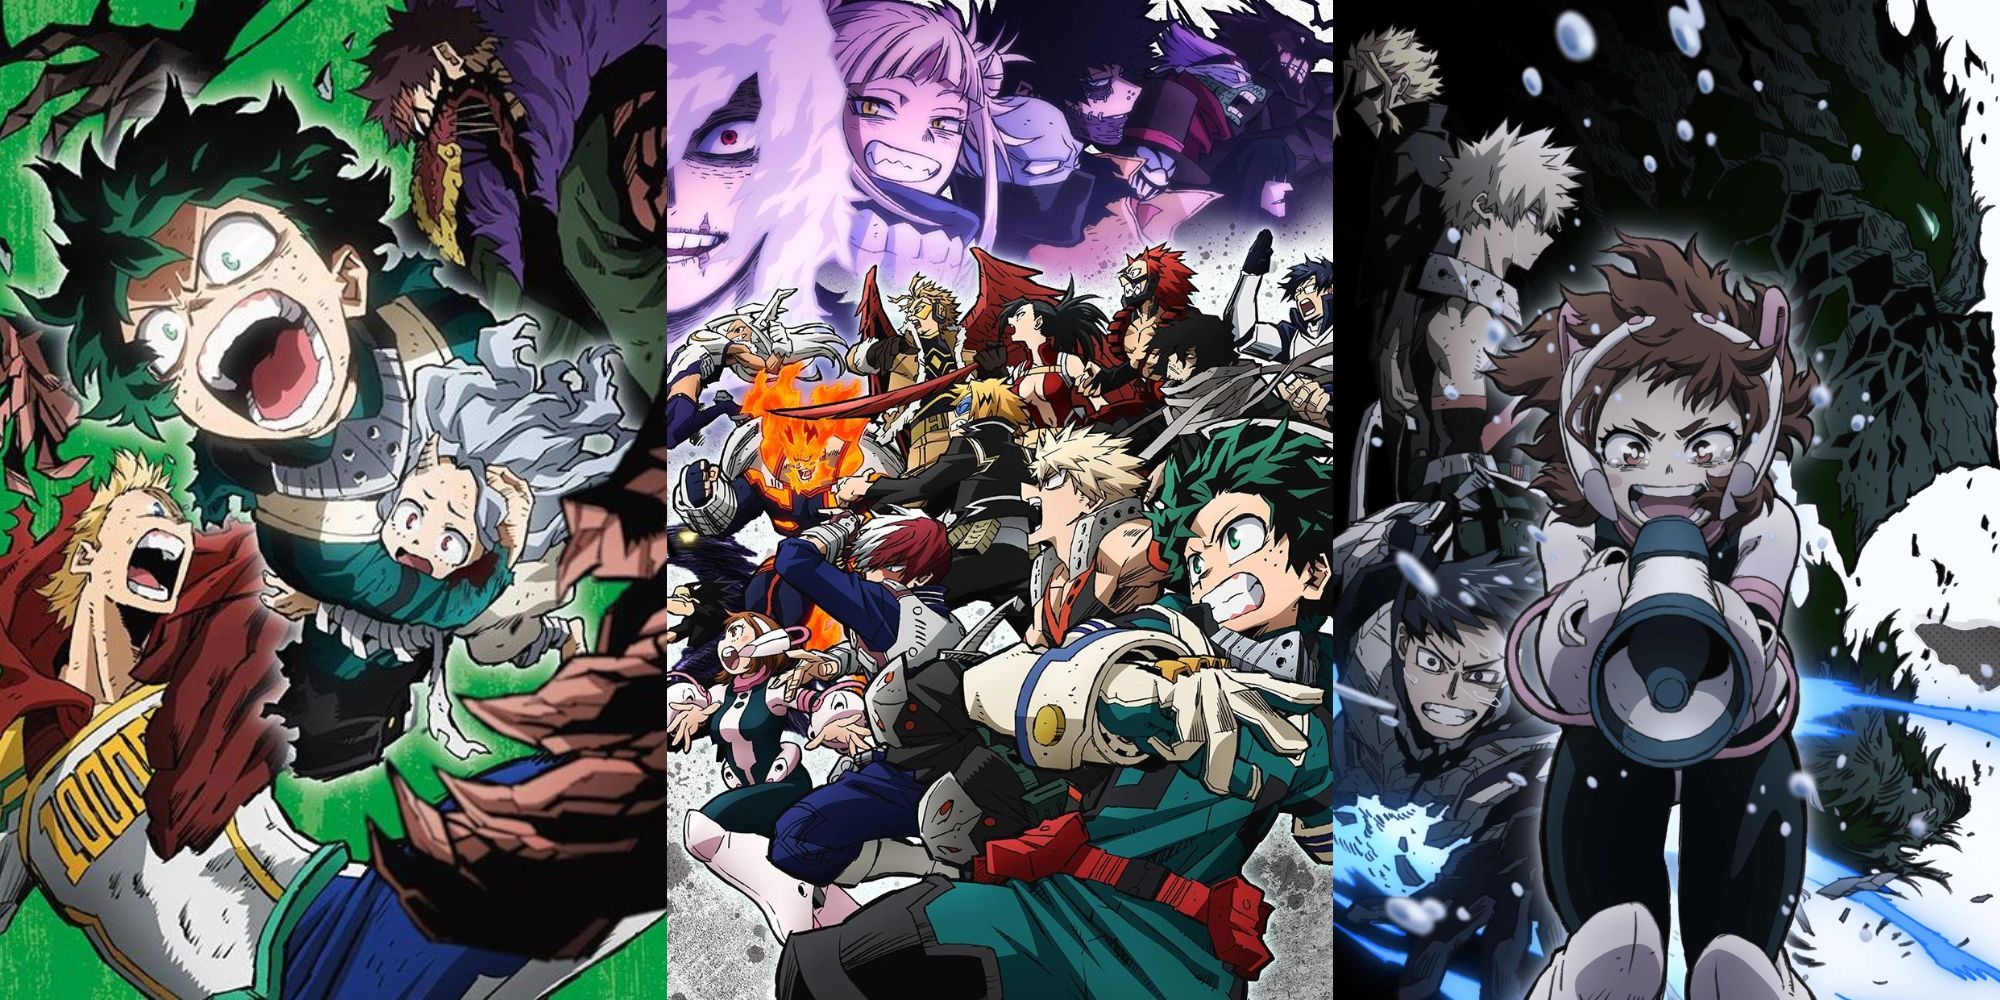 A collage with official promotional arcs of three arcs of the My Hero Academia anime: The Shie Hassaikai arc, the Paranormal Liberation War arc and the Dark Hero arc.